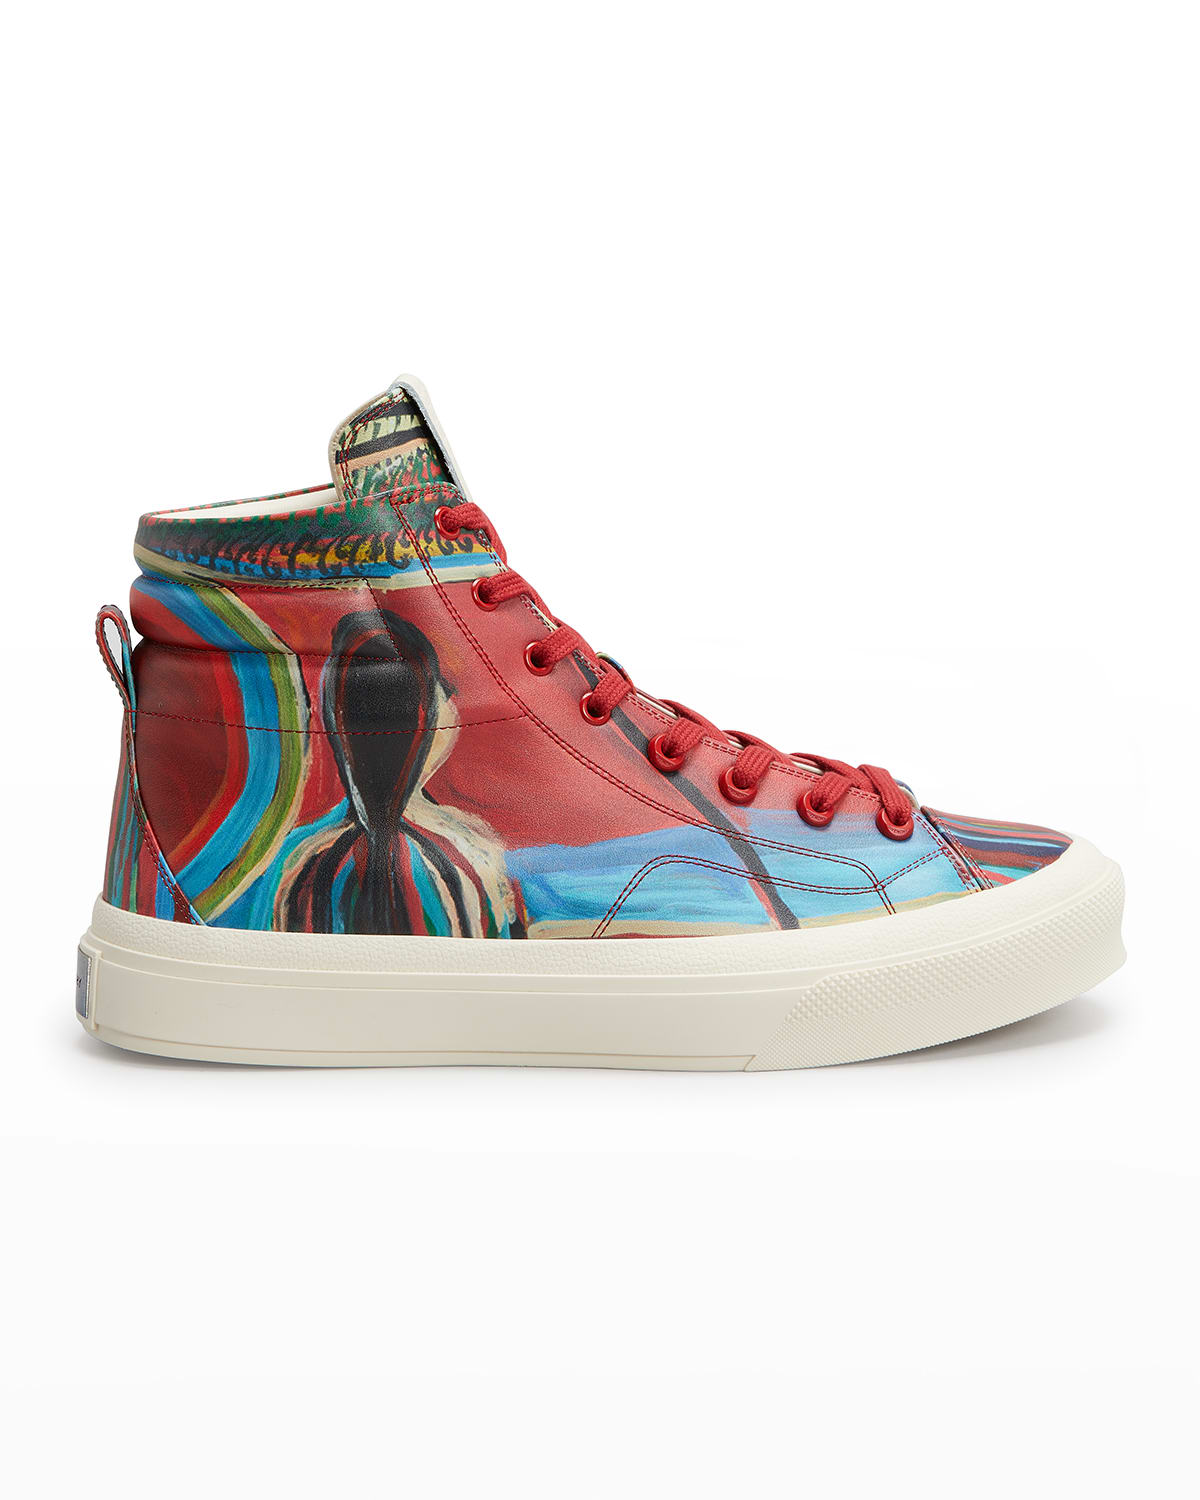 Givenchy x Josh Smith Men's City Reaper-Print Leather High Top Sneakers